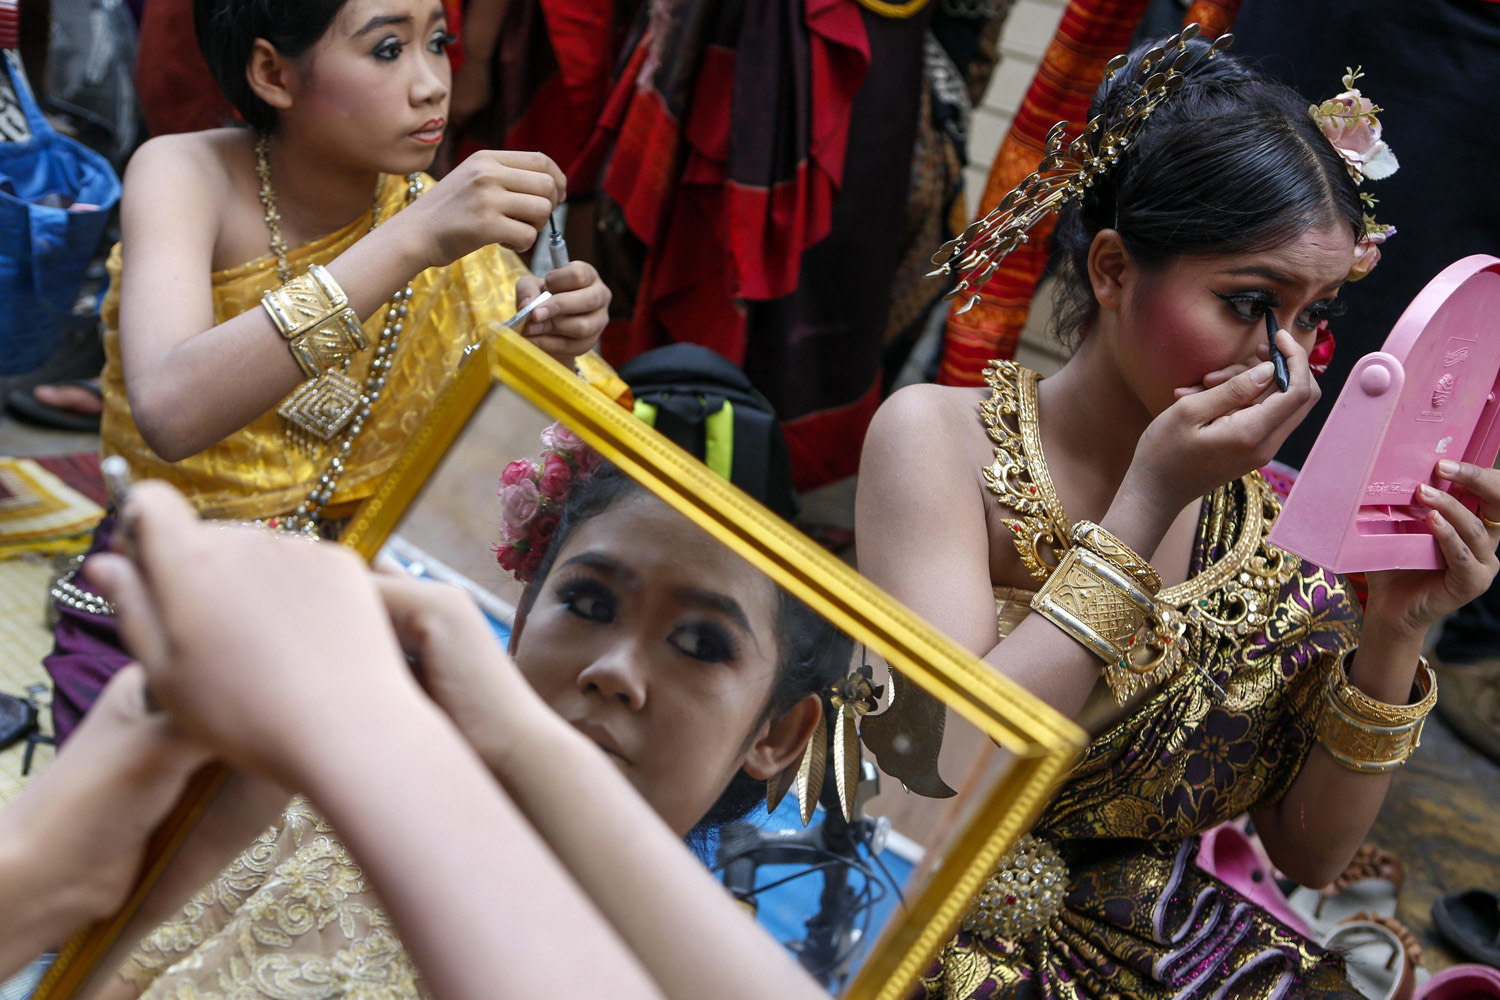 Dancers get their make up done backstage before their show at the Victory Monument during a military event in Bangkok